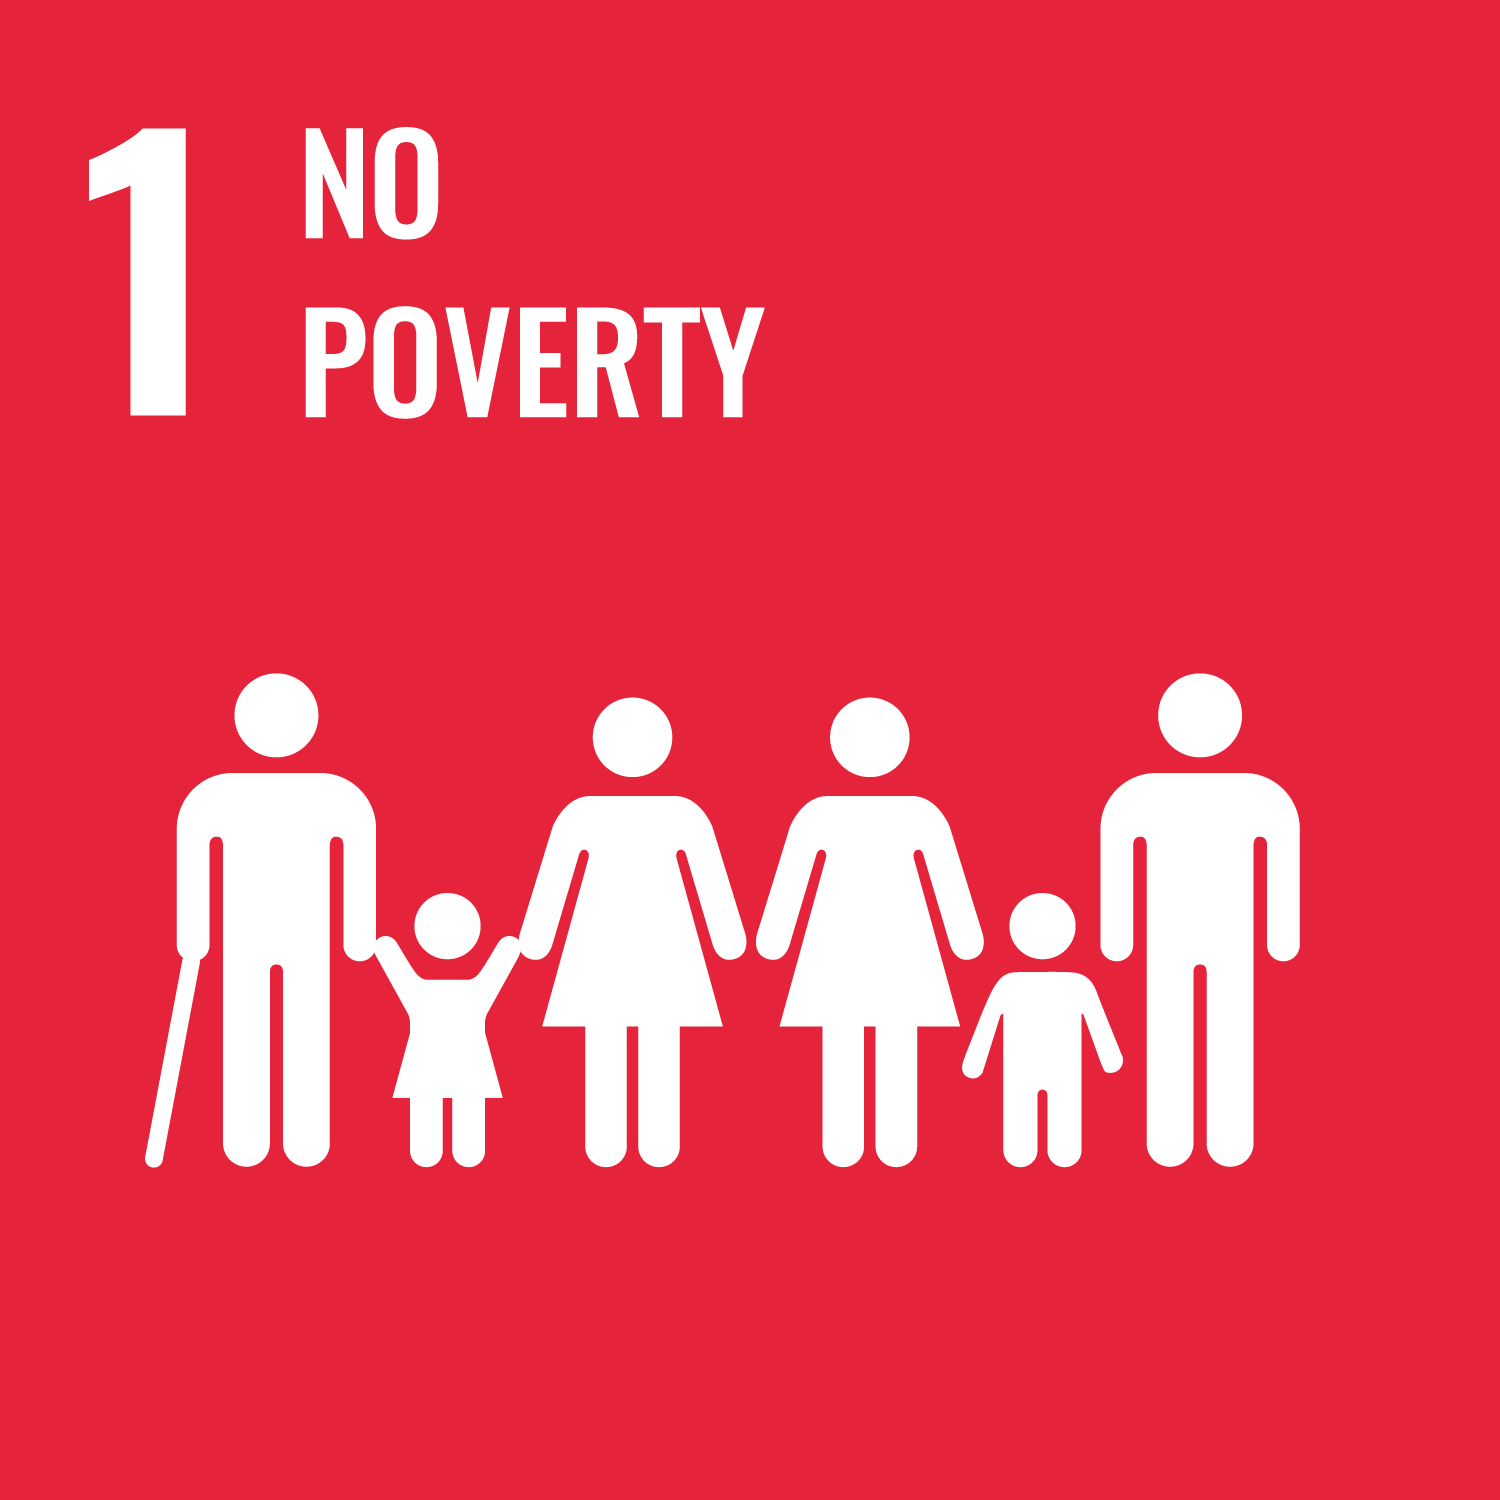 Logo SDG 1 No poverty: people on red background; Sustainable Development Goals (SDGs)